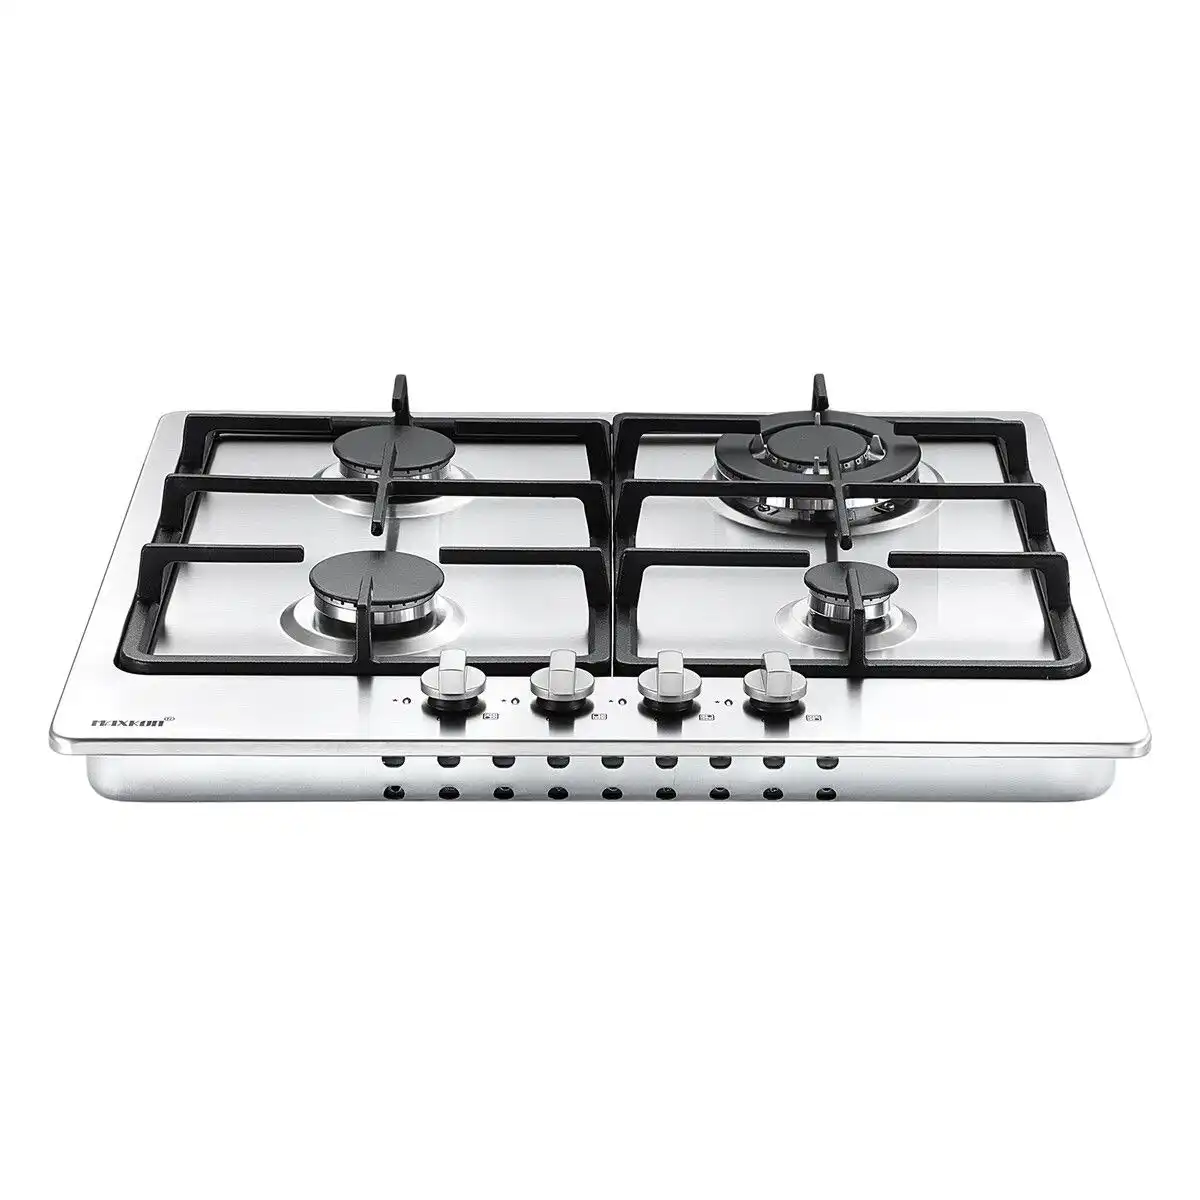 Maxkon  Gas Cooktop 4 Burners Cooker 60cm Stove Cook Tops Hobs Stovetop NG LPG Stainless Steel Surface Knobs